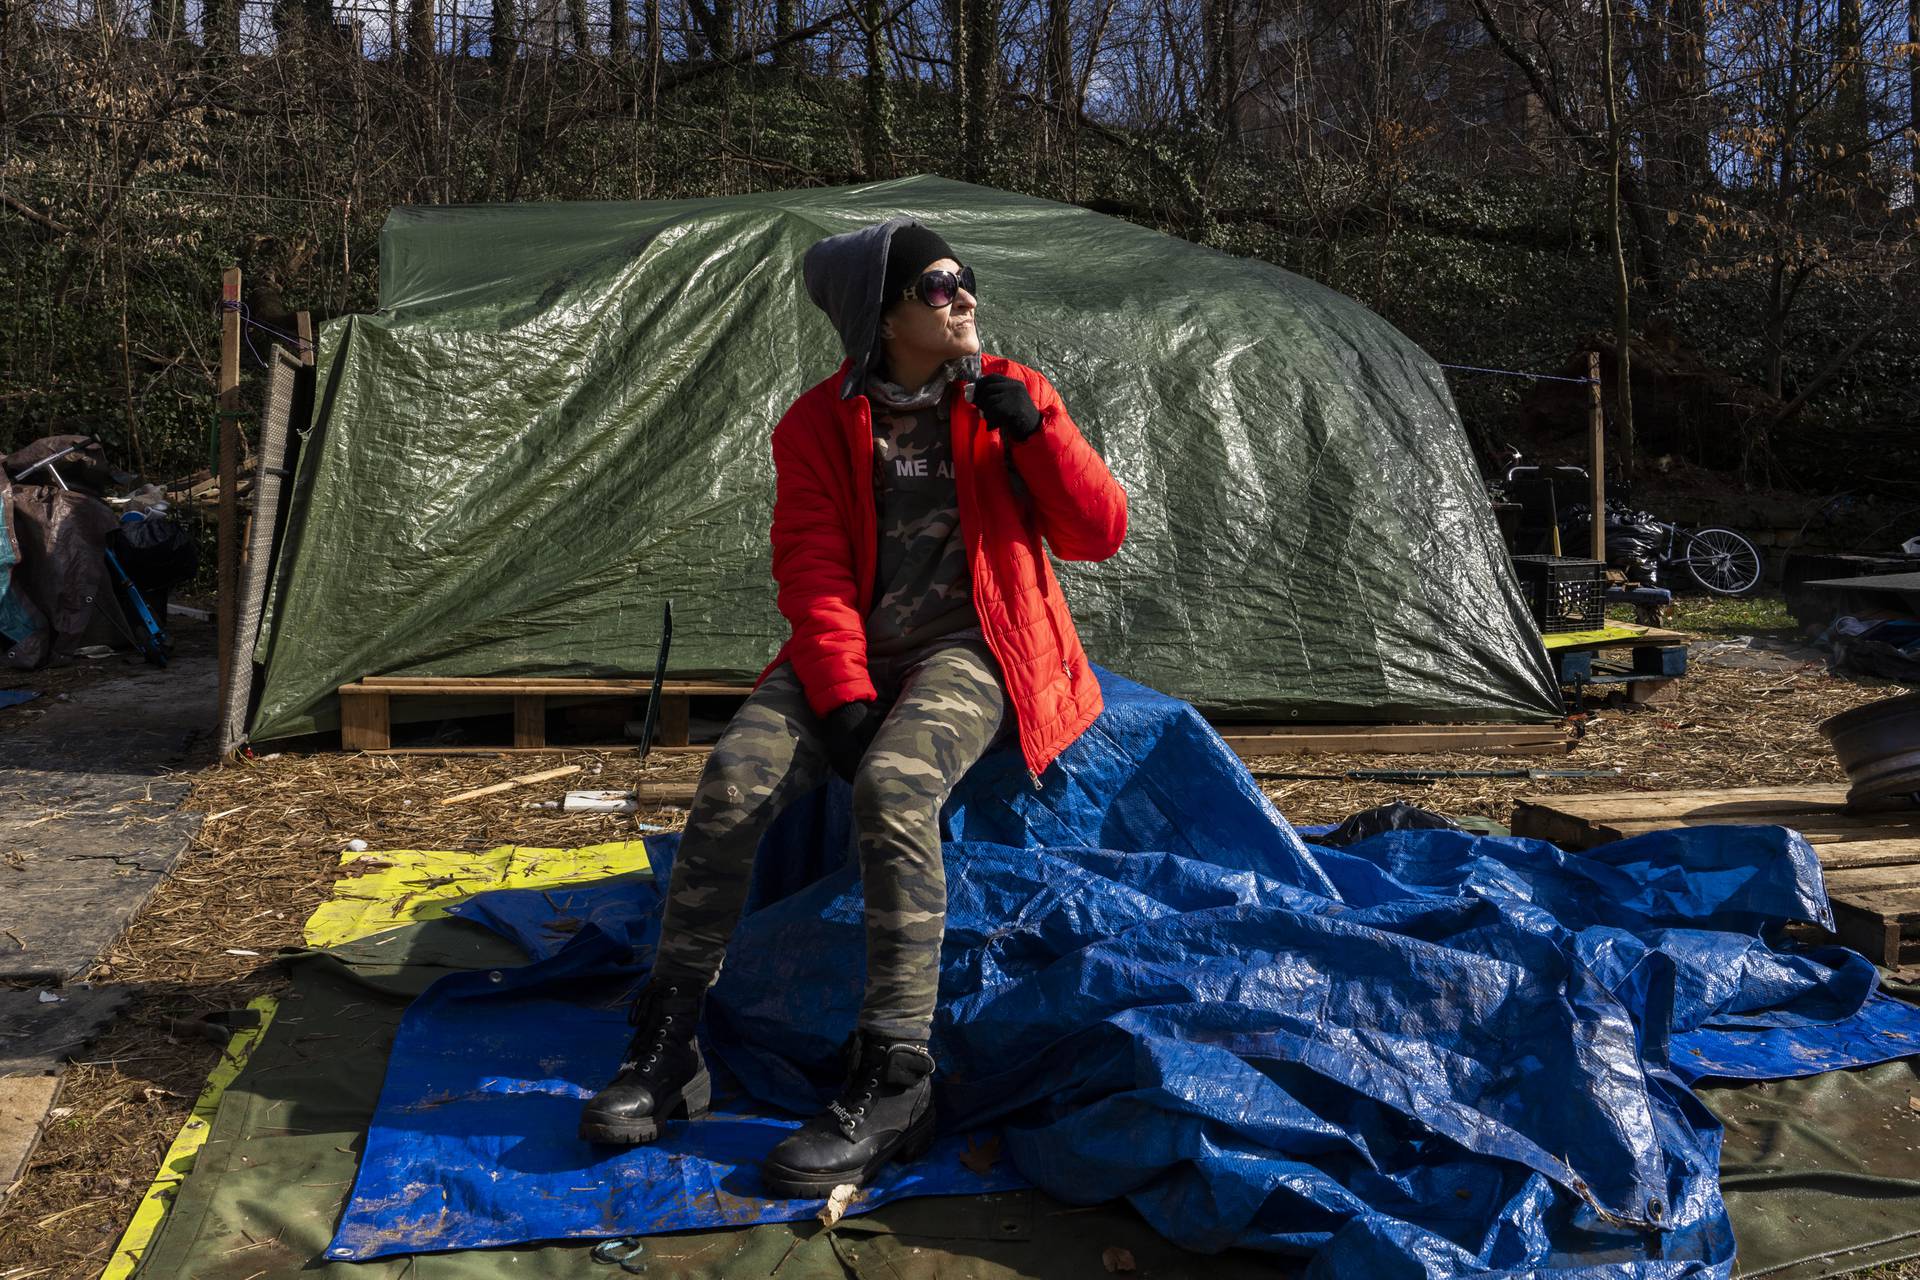 Stephanie Lovelace and her partner have lived in a tent in Wyman Park Dell since the summer. They along with several others in a rotating homeless encampment are going to have to leave the park as the city gradually cleans it out this month. She is pictured here on February 13, 2024.